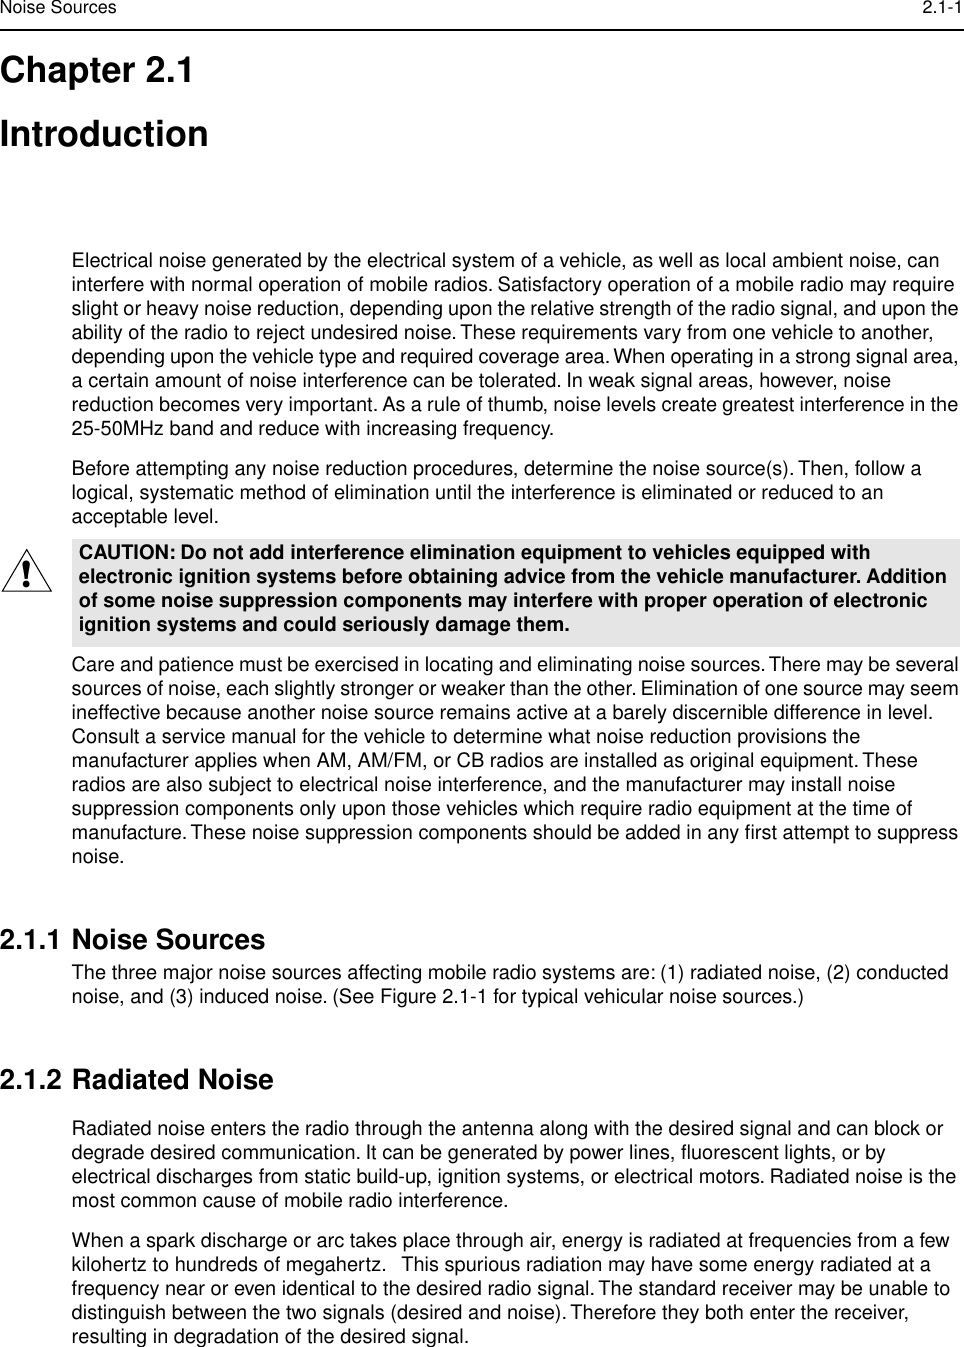  Noise Sources 2.1-1 Chapter 2.1Introduction Electrical noise generated by the electrical system of a vehicle, as well as local ambient noise, can interfere with normal operation of mobile radios. Satisfactory operation of a mobile radio may require slight or heavy noise reduction, depending upon the relative strength of the radio signal, and upon the ability of the radio to reject undesired noise. These requirements vary from one vehicle to another, depending upon the vehicle type and required coverage area. When operating in a strong signal area, a certain amount of noise interference can be tolerated. In weak signal areas, however, noise reduction becomes very important. As a rule of thumb, noise levels create greatest interference in the 25-50MHz band and reduce with increasing frequency.Before attempting any noise reduction procedures, determine the noise source(s). Then, follow a logical, systematic method of elimination until the interference is eliminated or reduced to an acceptable level.Care and patience must be exercised in locating and eliminating noise sources. There may be several sources of noise, each slightly stronger or weaker than the other. Elimination of one source may seem ineffective because another noise source remains active at a barely discernible difference in level. Consult a service manual for the vehicle to determine what noise reduction provisions the manufacturer applies when AM, AM/FM, or CB radios are installed as original equipment. These radios are also subject to electrical noise interference, and the manufacturer may install noise suppression components only upon those vehicles which require radio equipment at the time of manufacture. These noise suppression components should be added in any ﬁrst attempt to suppress noise. 2.1.1 Noise Sources The three major noise sources affecting mobile radio systems are: (1) radiated noise, (2) conducted noise, and (3) induced noise. (See Figure 2.1-1 for typical vehicular noise sources.) 2.1.2 Radiated Noise Radiated noise enters the radio through the antenna along with the desired signal and can block or degrade desired communication. It can be generated by power lines, ﬂuorescent lights, or by electrical discharges from static build-up, ignition systems, or electrical motors. Radiated noise is the most common cause of mobile radio interference.When a spark discharge or arc takes place through air, energy is radiated at frequencies from a few kilohertz to hundreds of megahertz.   This spurious radiation may have some energy radiated at a frequency near or even identical to the desired radio signal. The standard receiver may be unable to distinguish between the two signals (desired and noise). Therefore they both enter the receiver, resulting in degradation of the desired signal. CAUTION: Do not add interference elimination equipment to vehicles equipped with electronic ignition systems before obtaining advice from the vehicle manufacturer. Addition of some noise suppression components may interfere with proper operation of electronic ignition systems and could seriously damage them.!